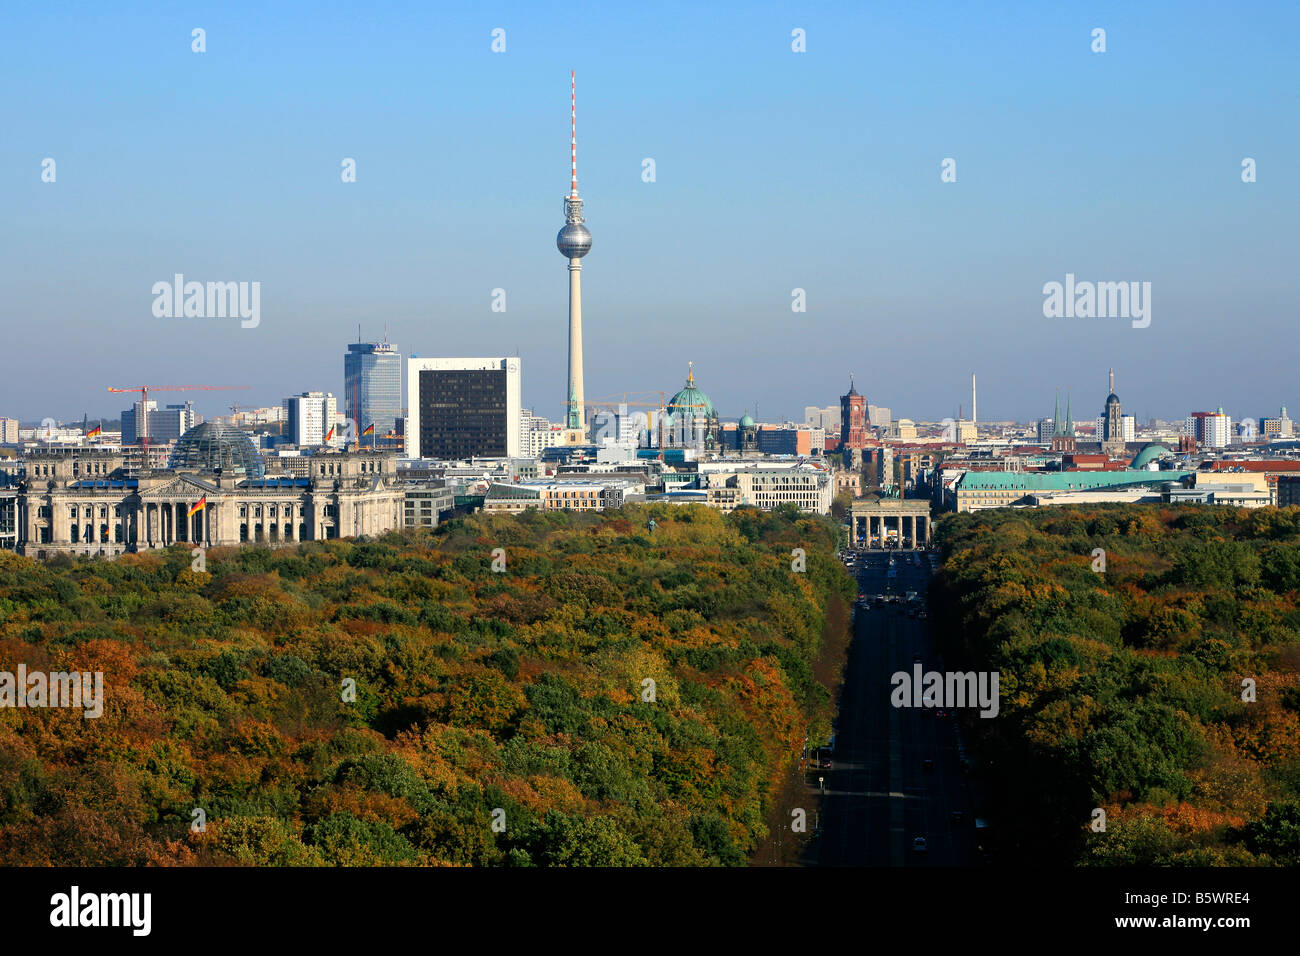 Panoramic view from the Victory Column at the Brandenburg Gate, Reichstag and other landmarks in Berlin, Germany Stock Photo